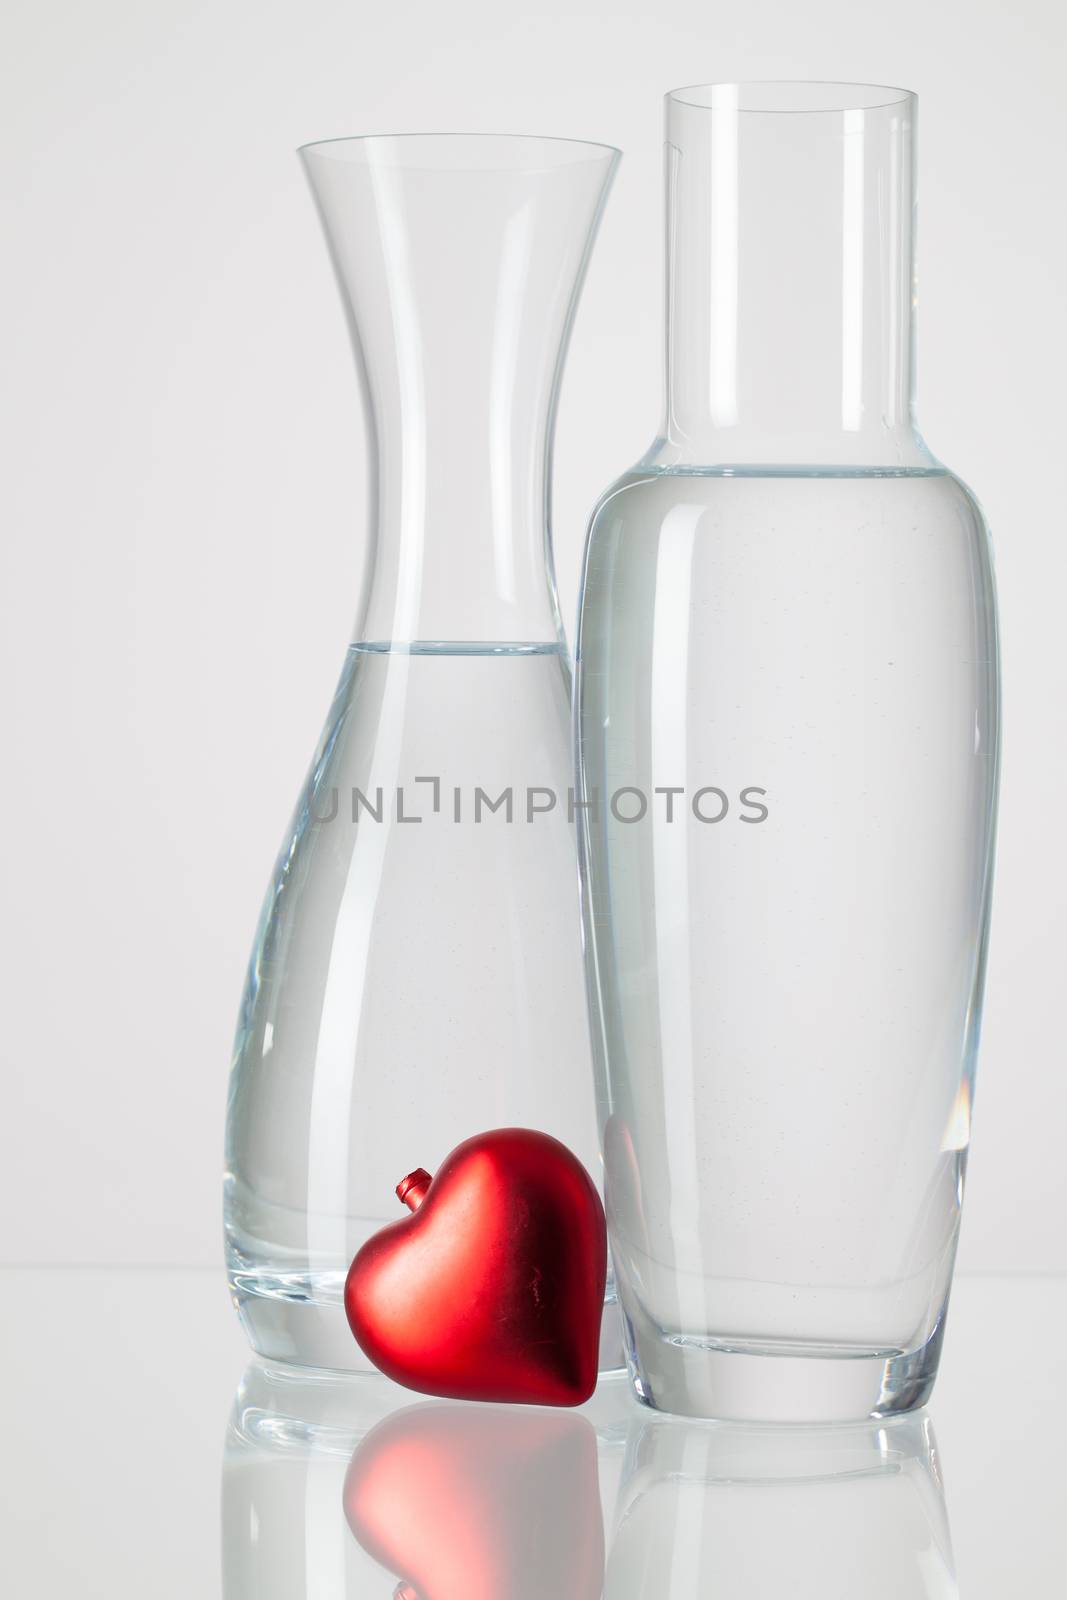 Two vases with clean water and red heart  on a glass table